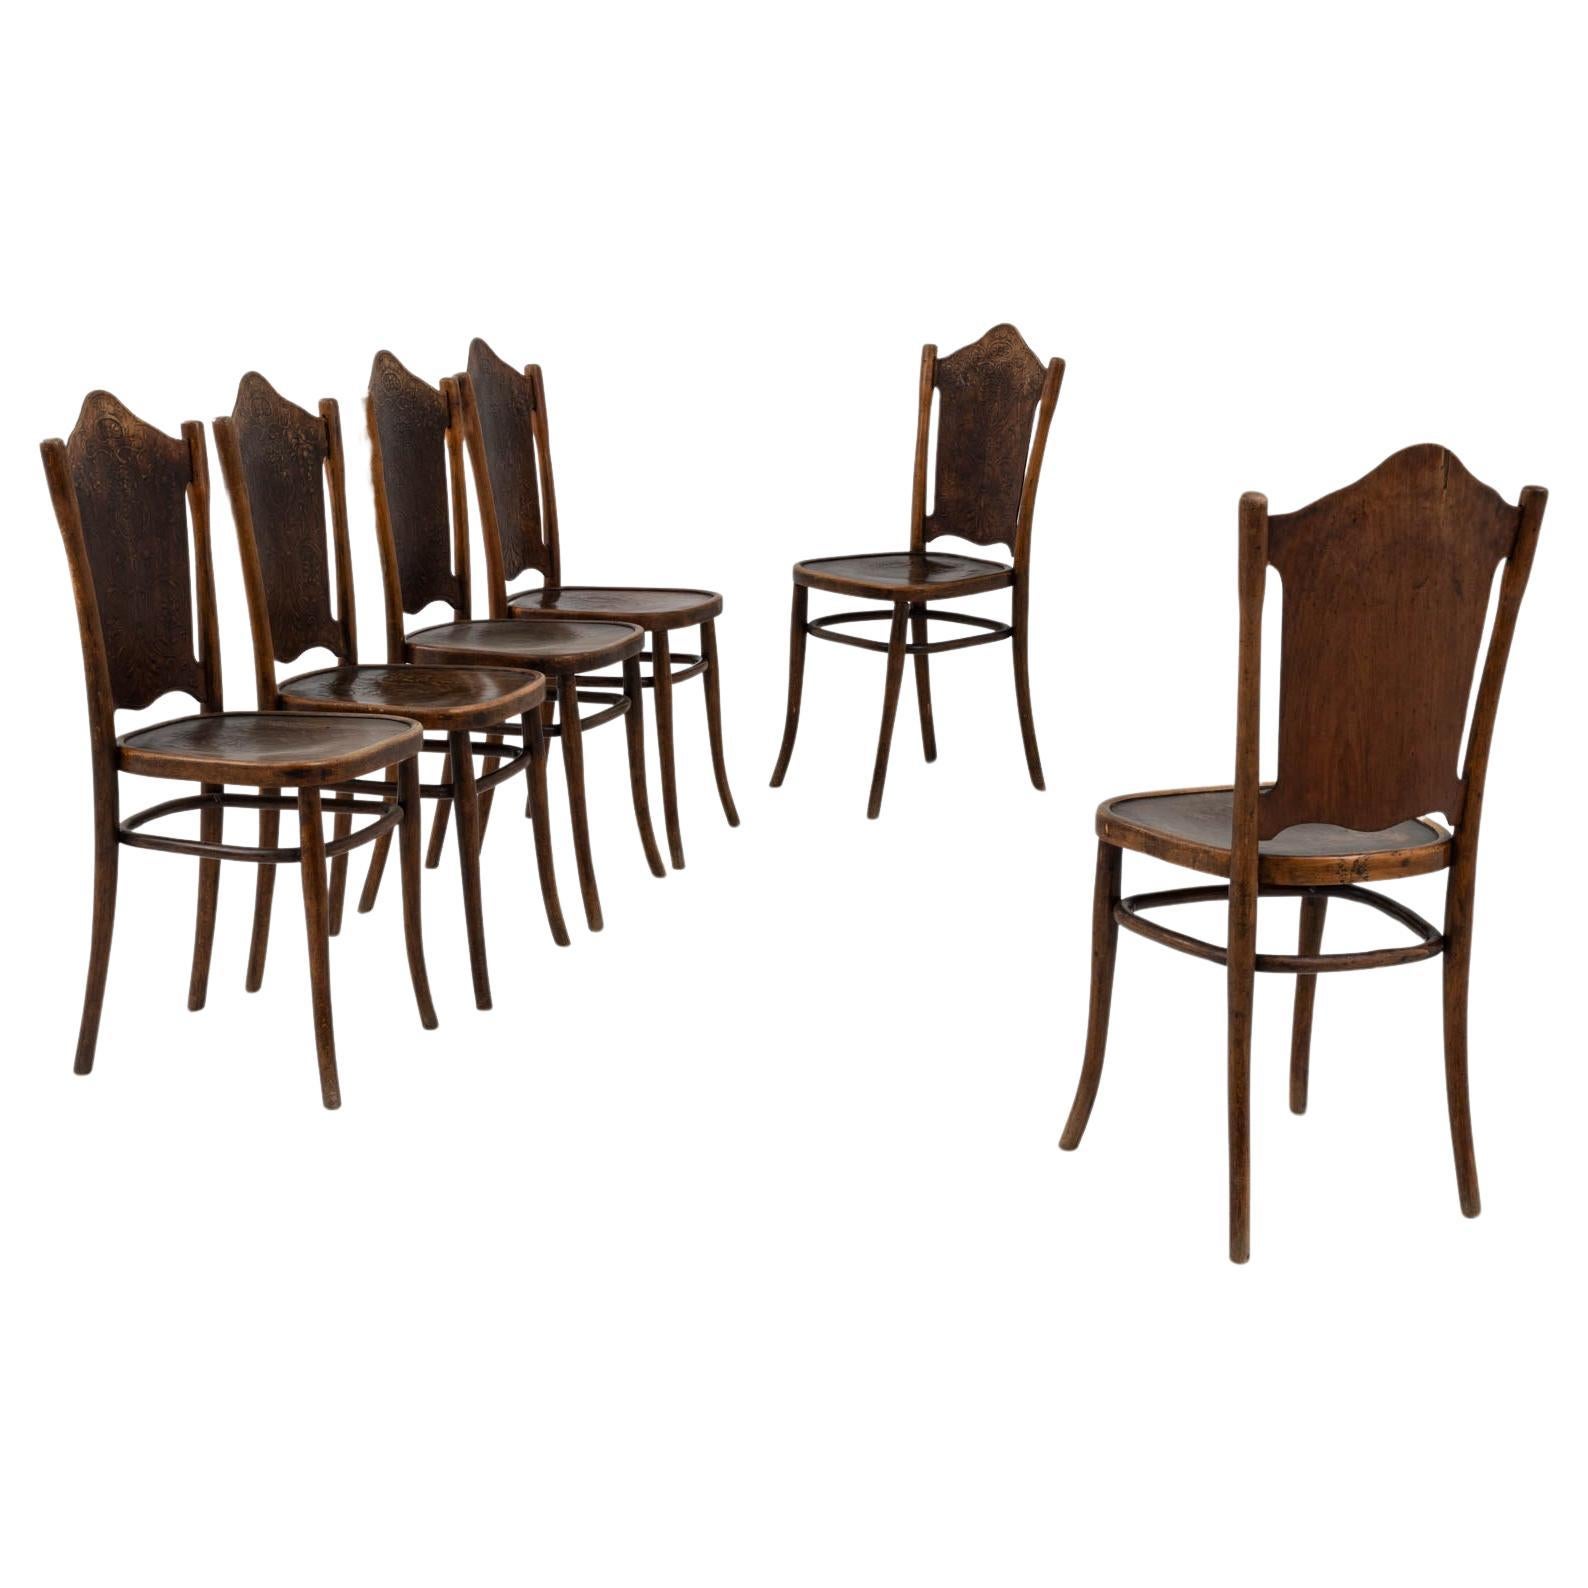 1910s Austrian Wooden Dining Chairs By Thonet, Set of 6